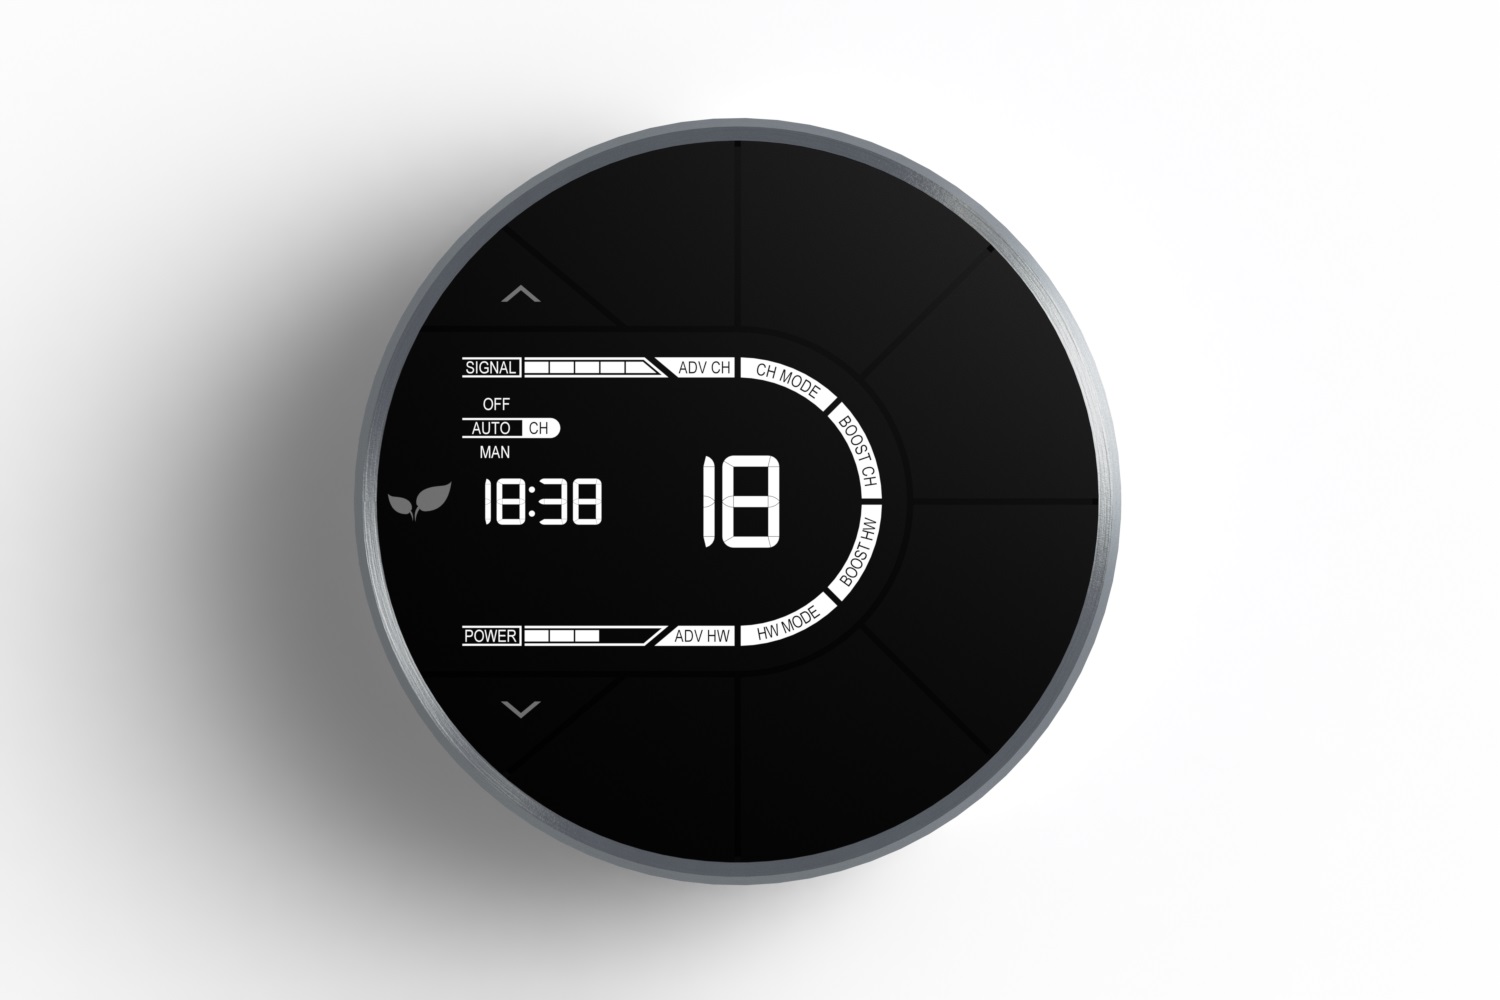 Buy our Landlord Smart Thermostat. Perfect for your HMO properties.